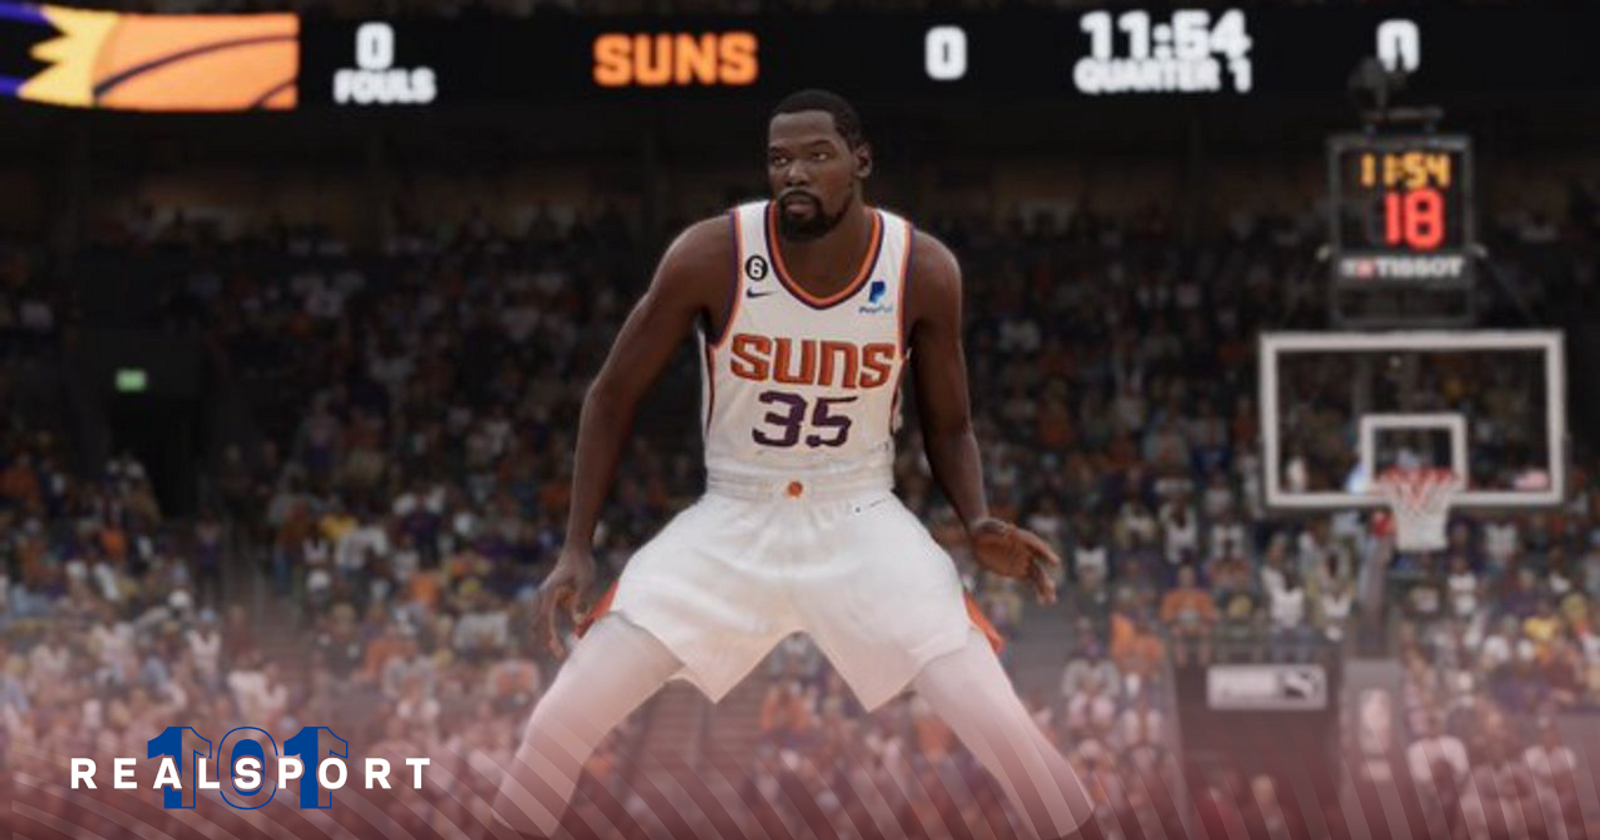 NBA 2K24 Releases The Official New Player Rankings